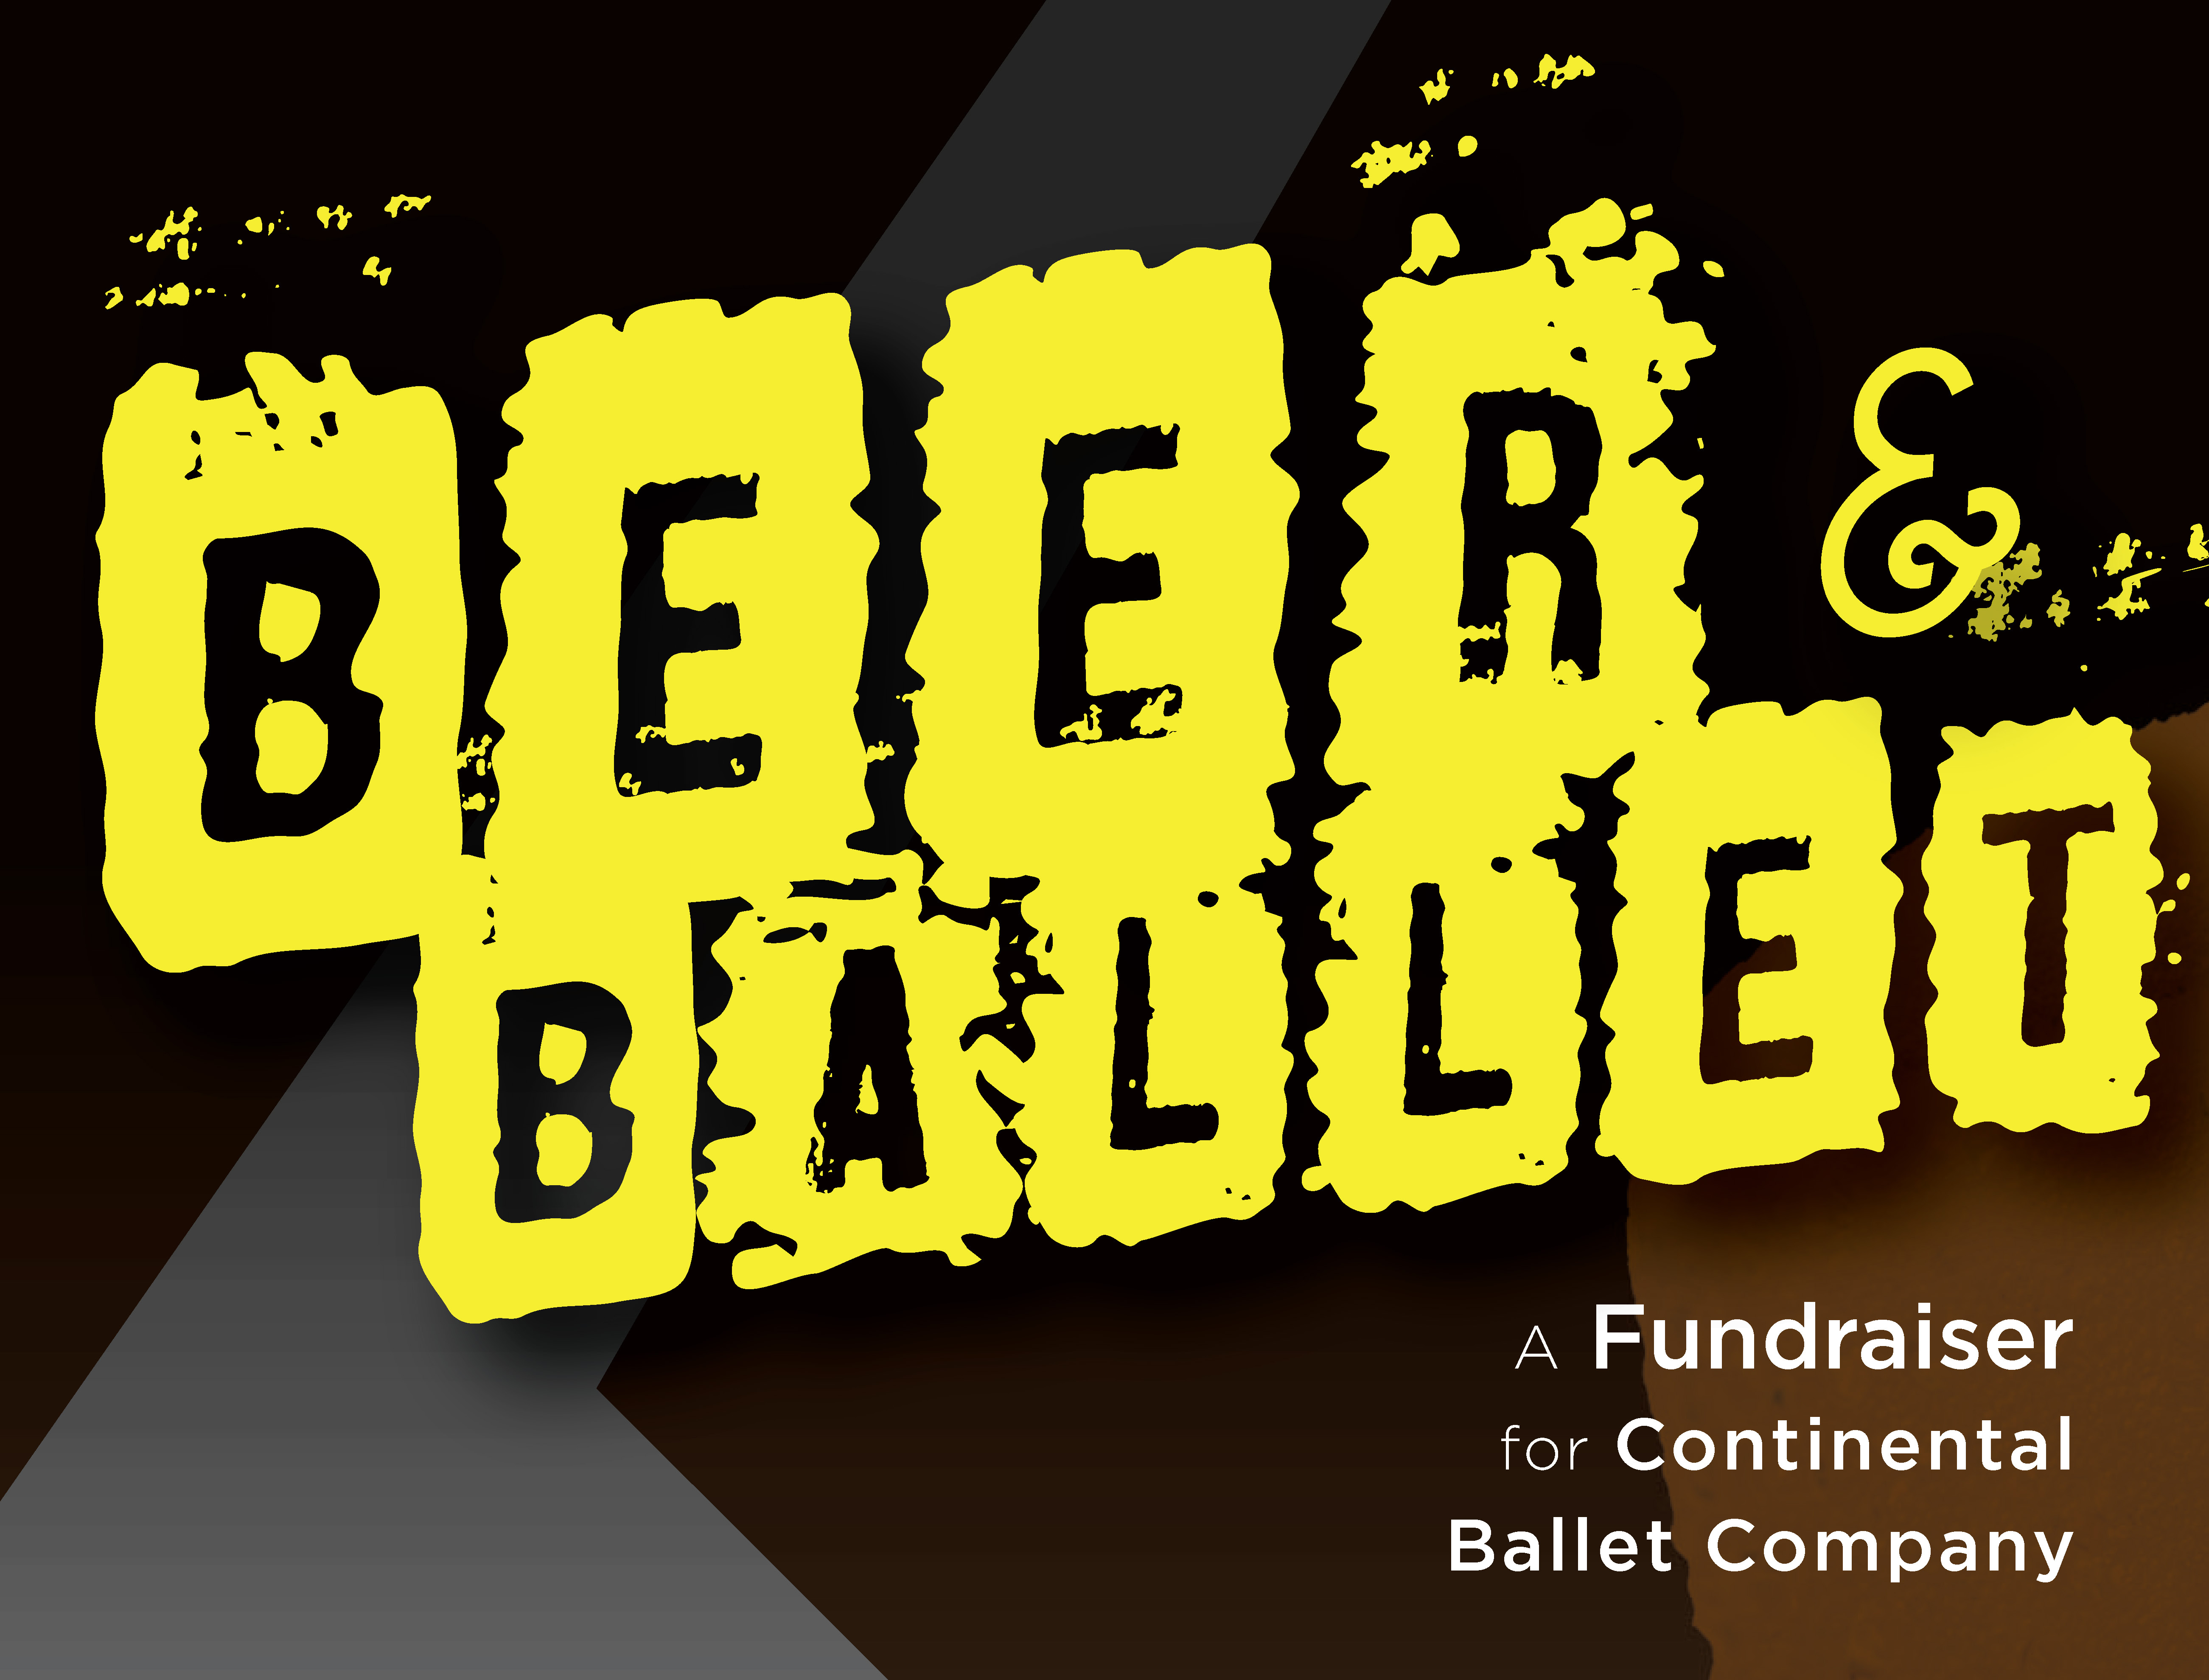 Continental Ballet Company Beer and Ballet logo graphic